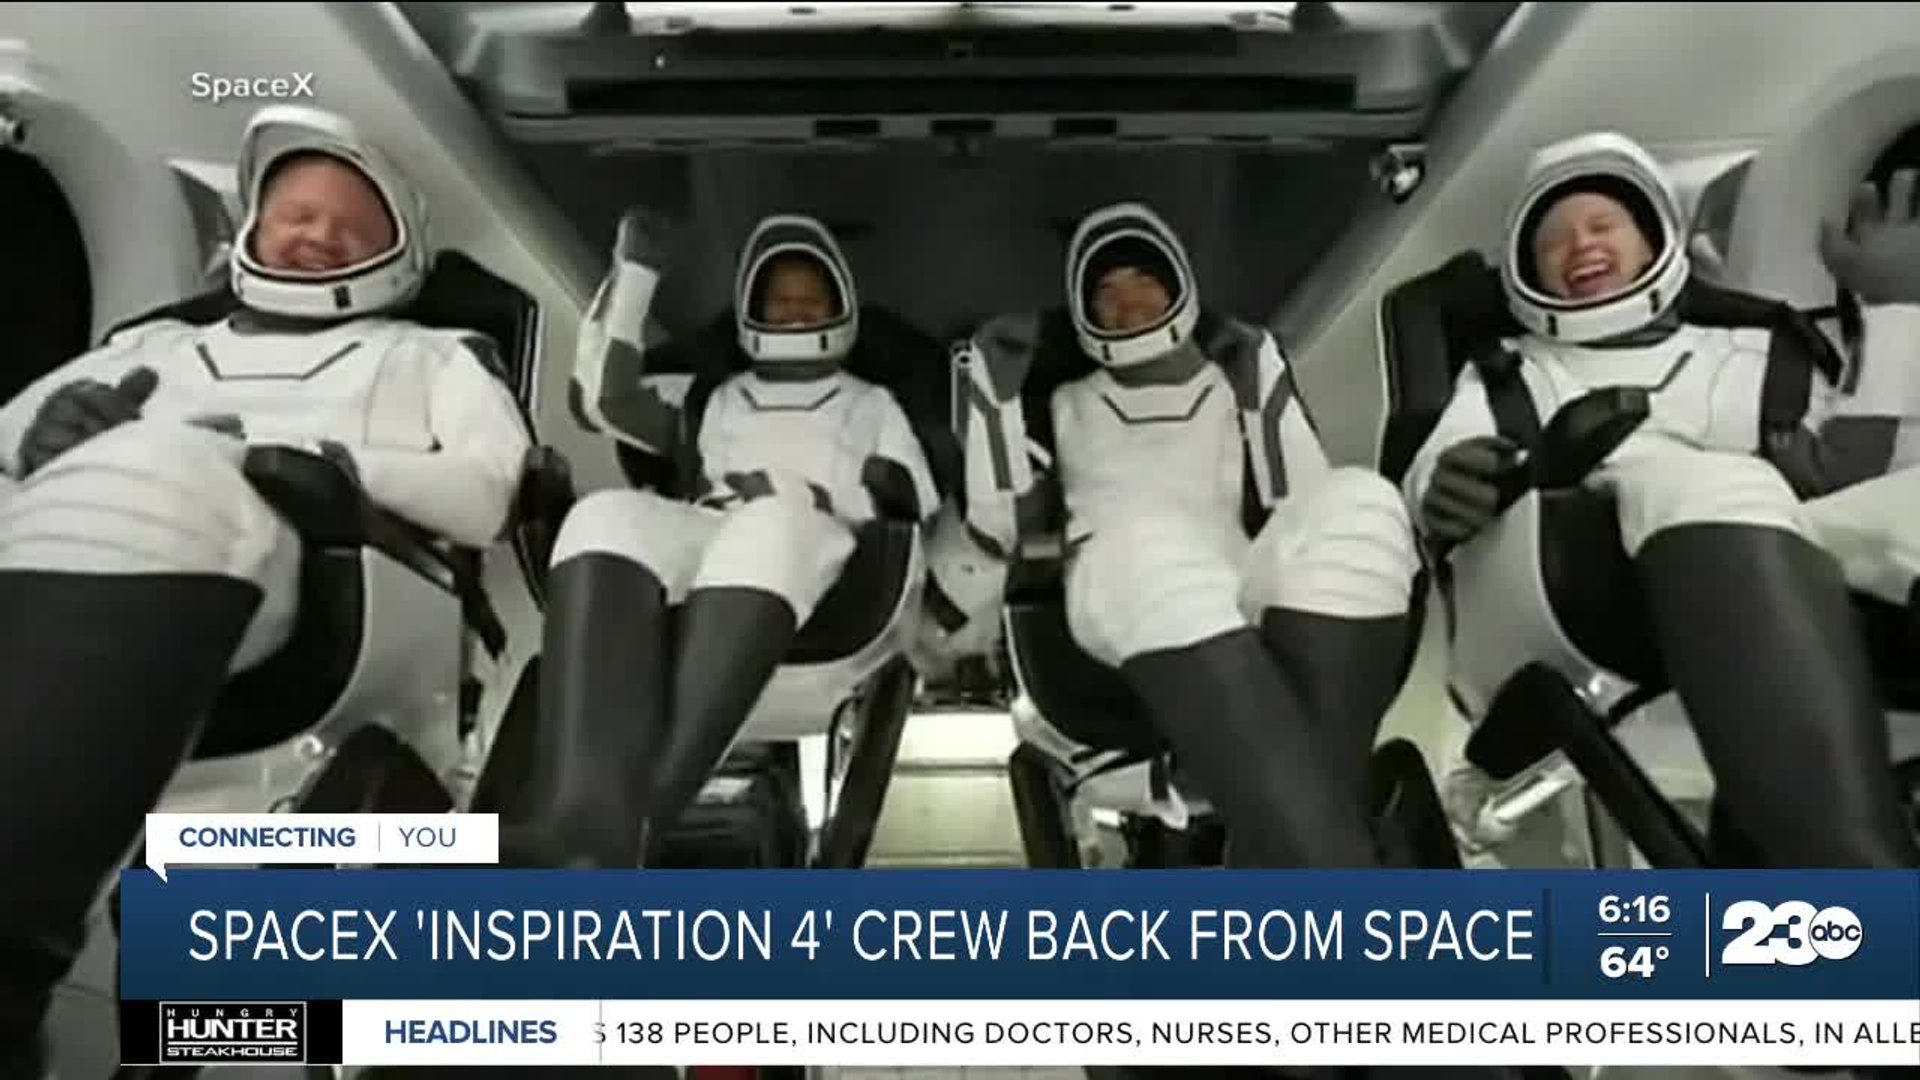 SpaceX crew back from space